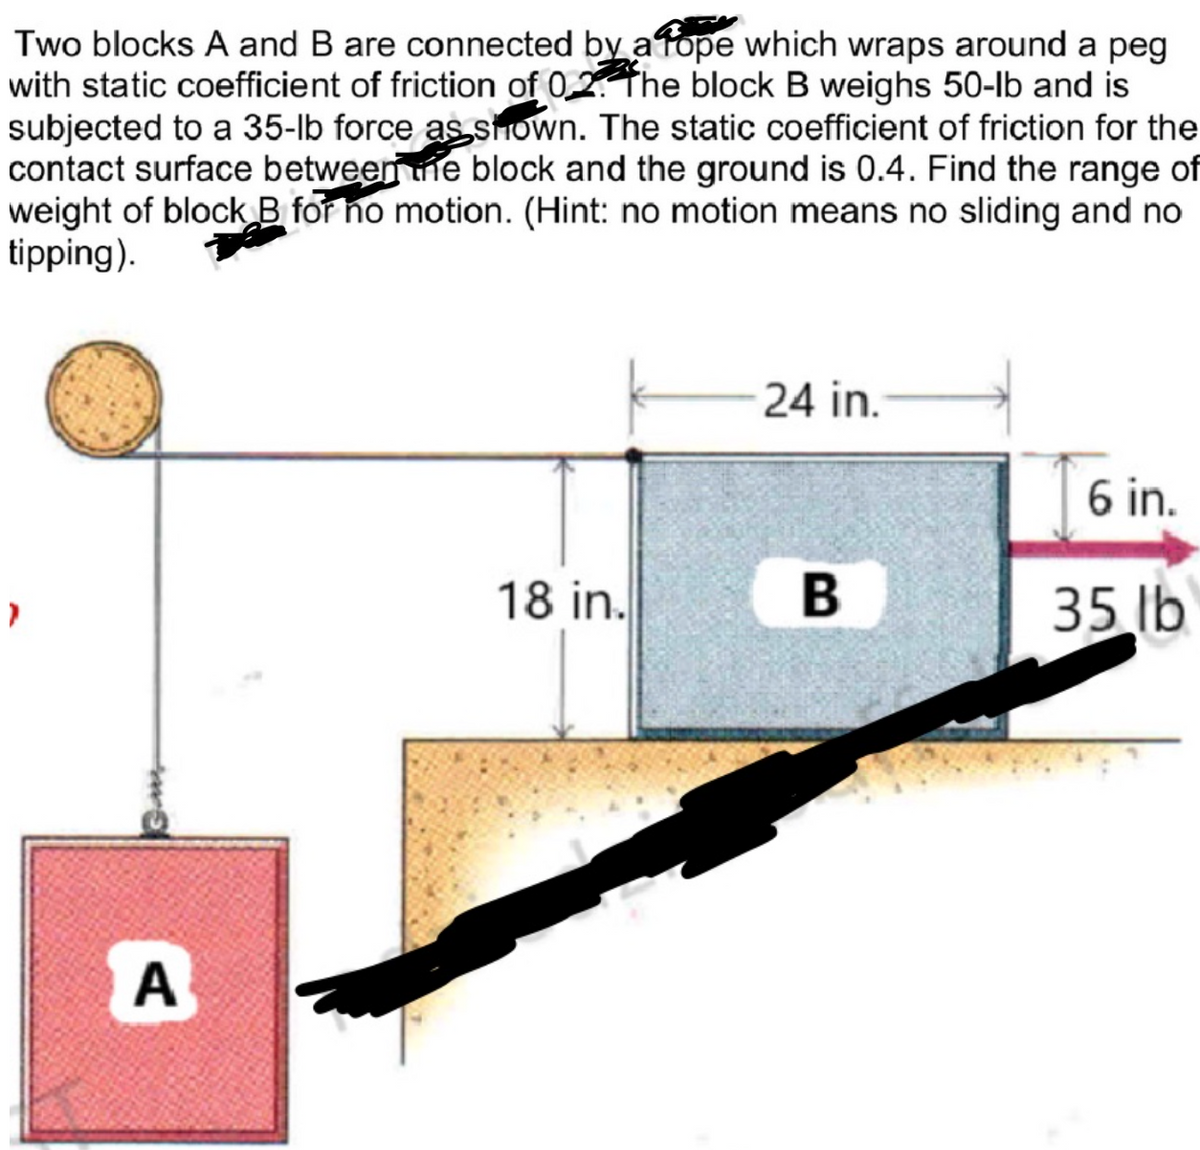 Two blocks A and B are connected by a tope which wraps around a peg
with static coefficient of friction of 02. The block B weighs 50-lb and is
subjected to a 35-lb force as shown. The static coefficient of friction for the
contact surface between the block and the ground is 0.4. Find the range of
weight of block B for no motion. (Hint: no motion means no sliding and no
tipping).
A
18 in.
24 in.
B
6 in.
35 lb